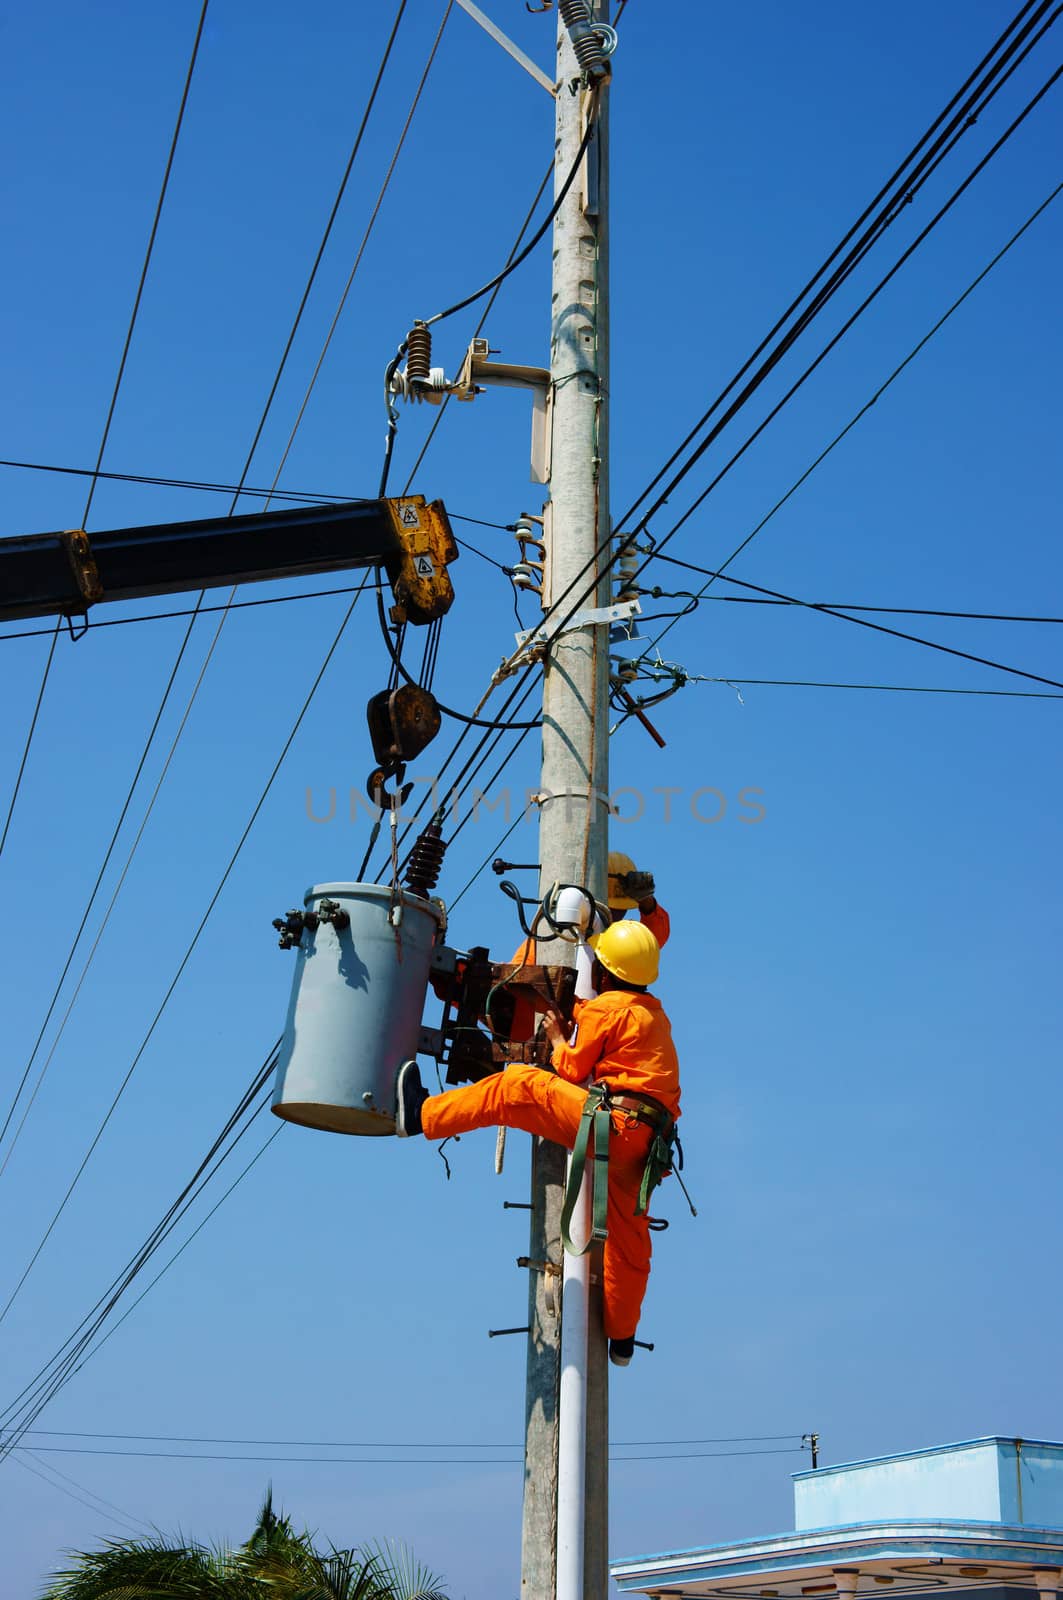  electrician repair system of electric wire by xuanhuongho